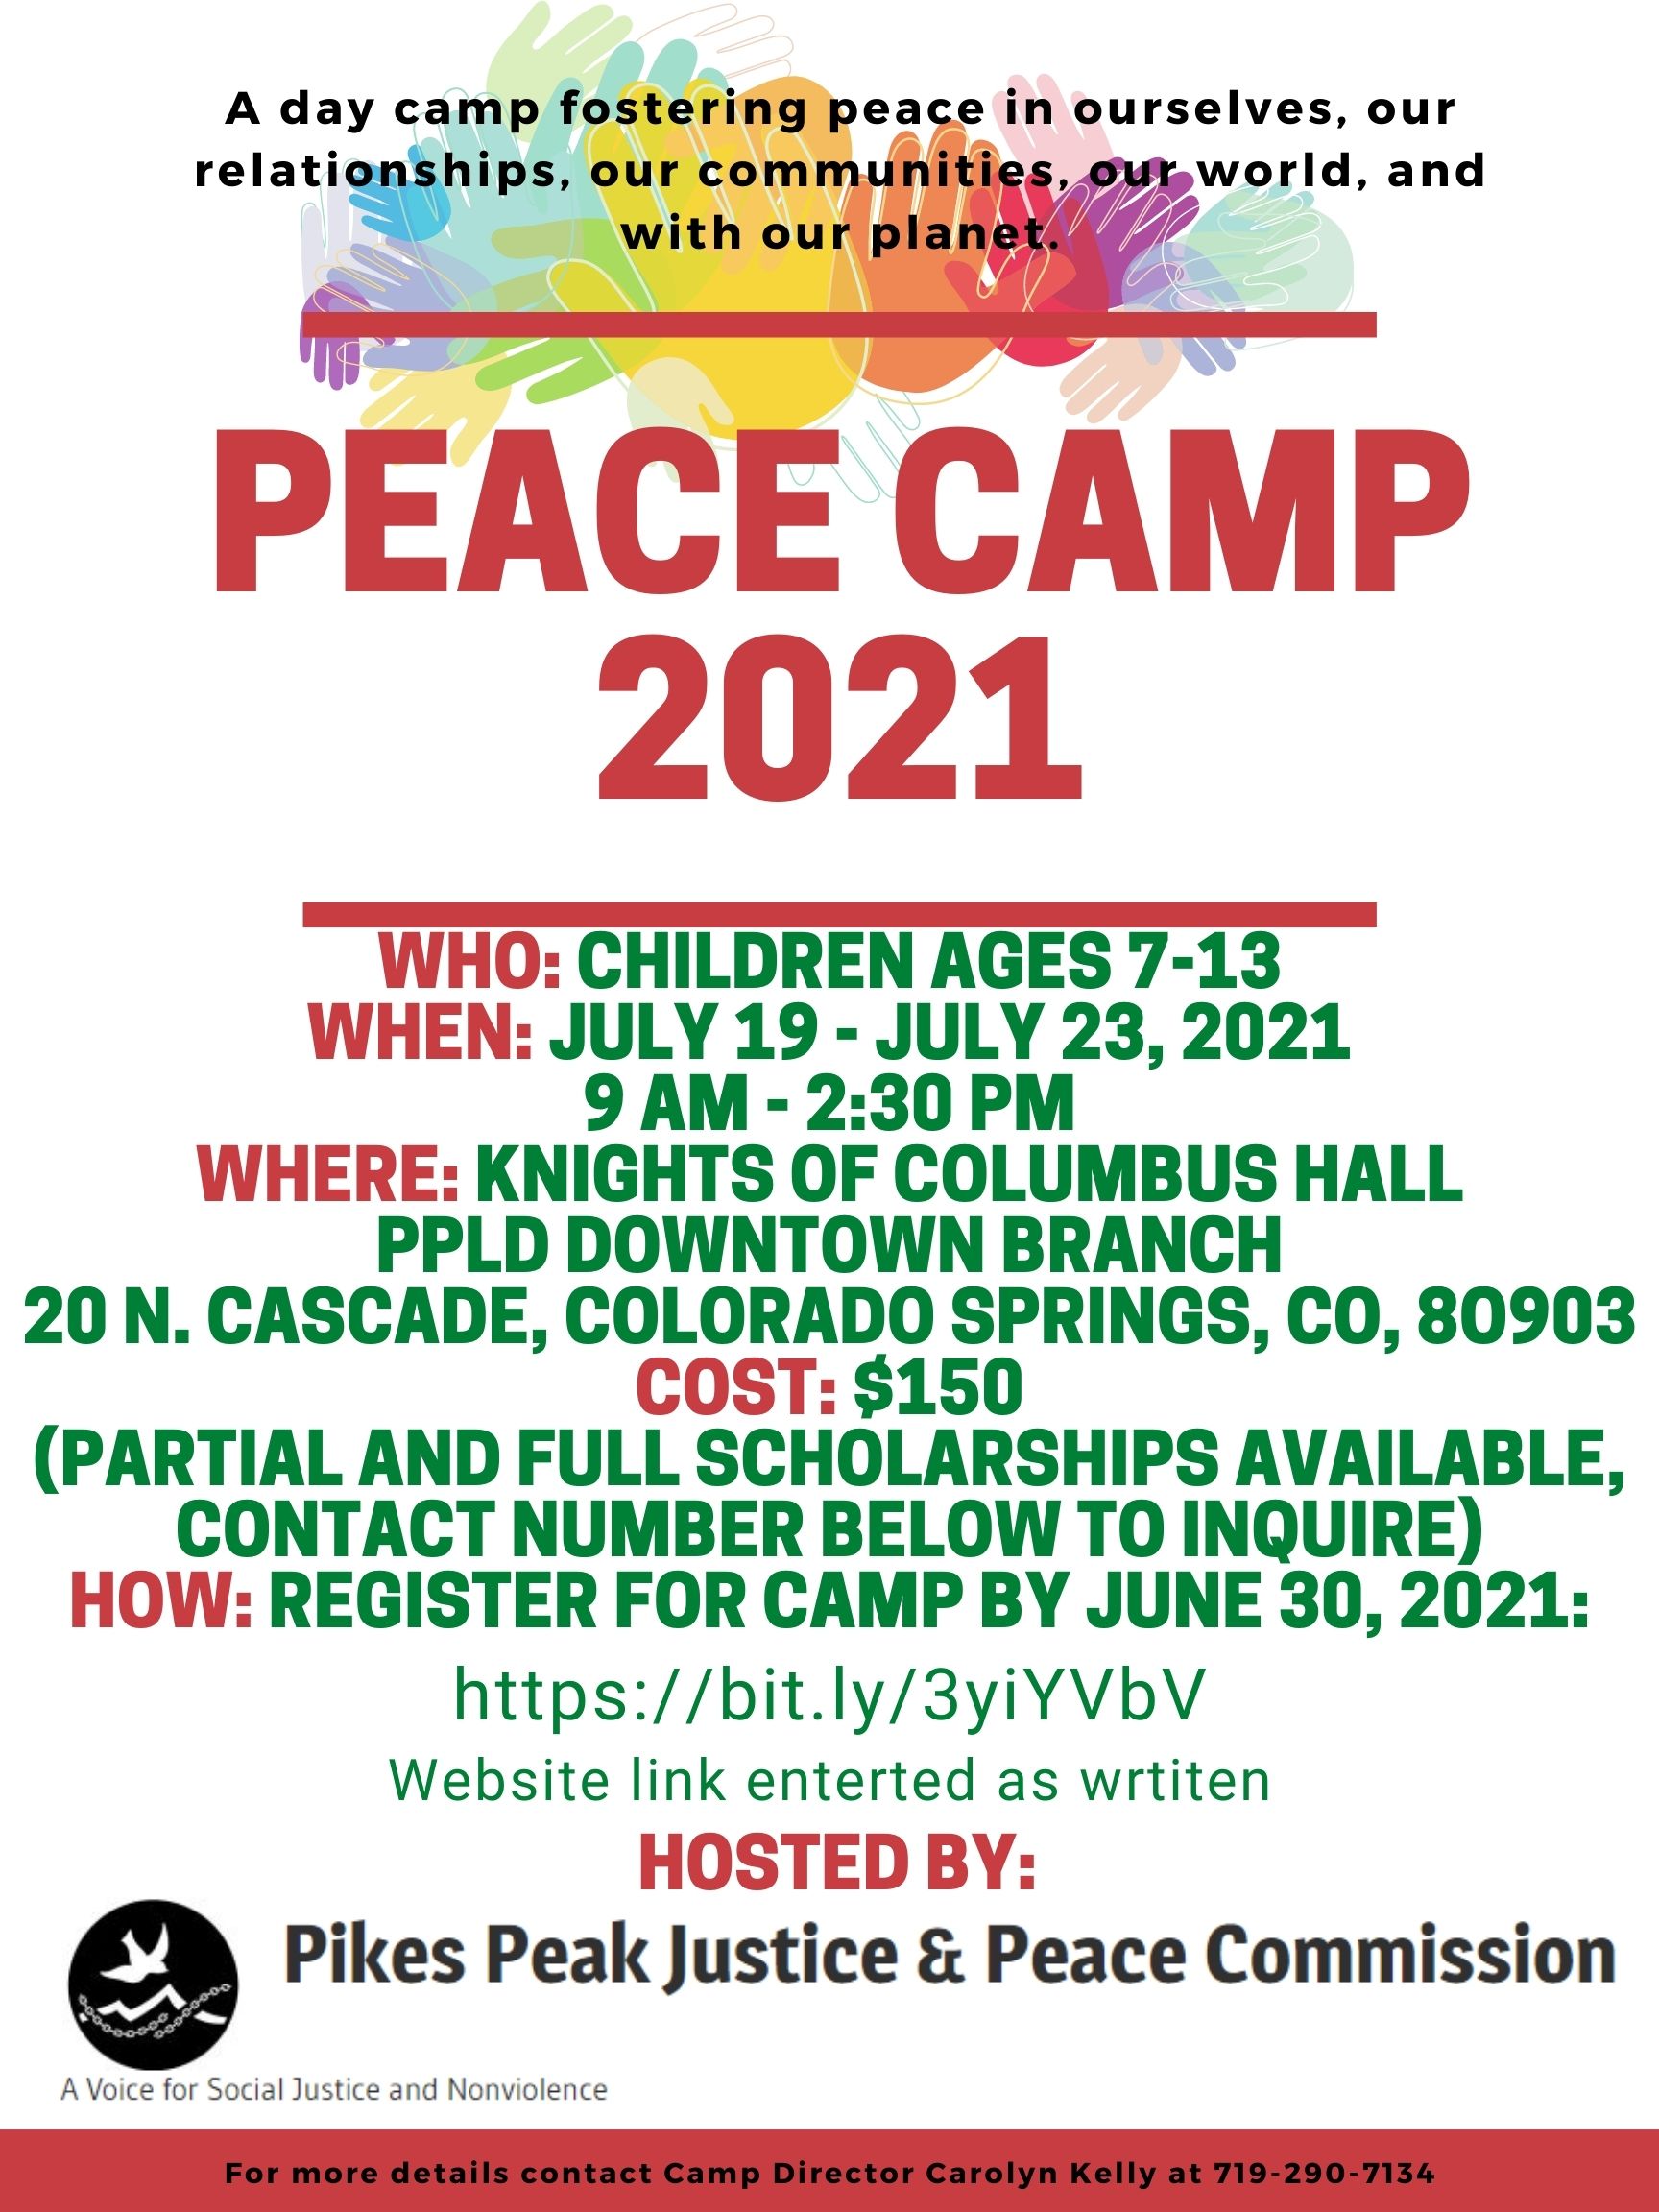 Poster with information about the Peace Camp, including cost, location, dates and times.